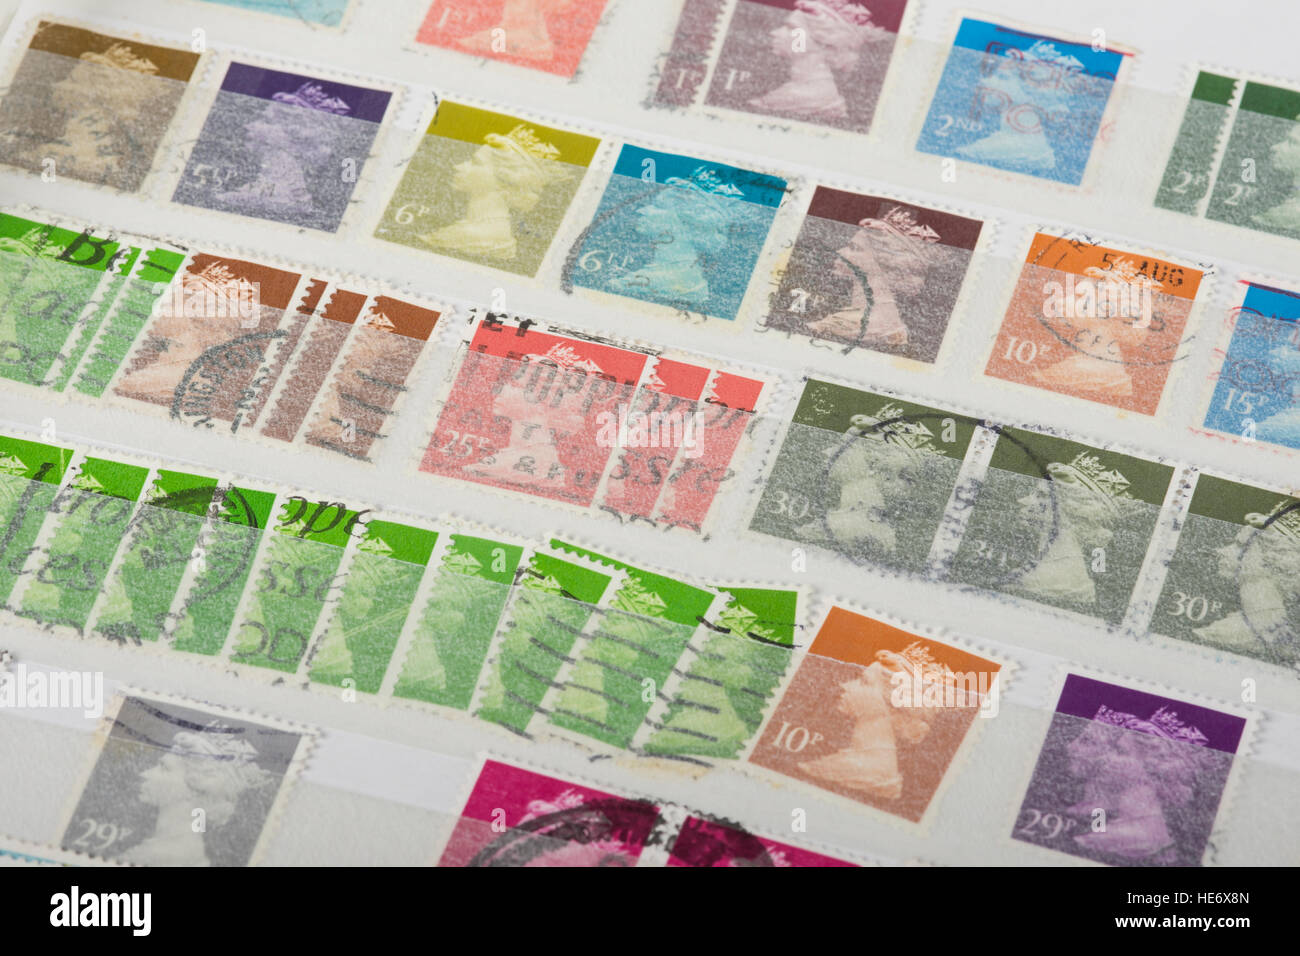 some old UK postage stamps in a collection album Stock Photo